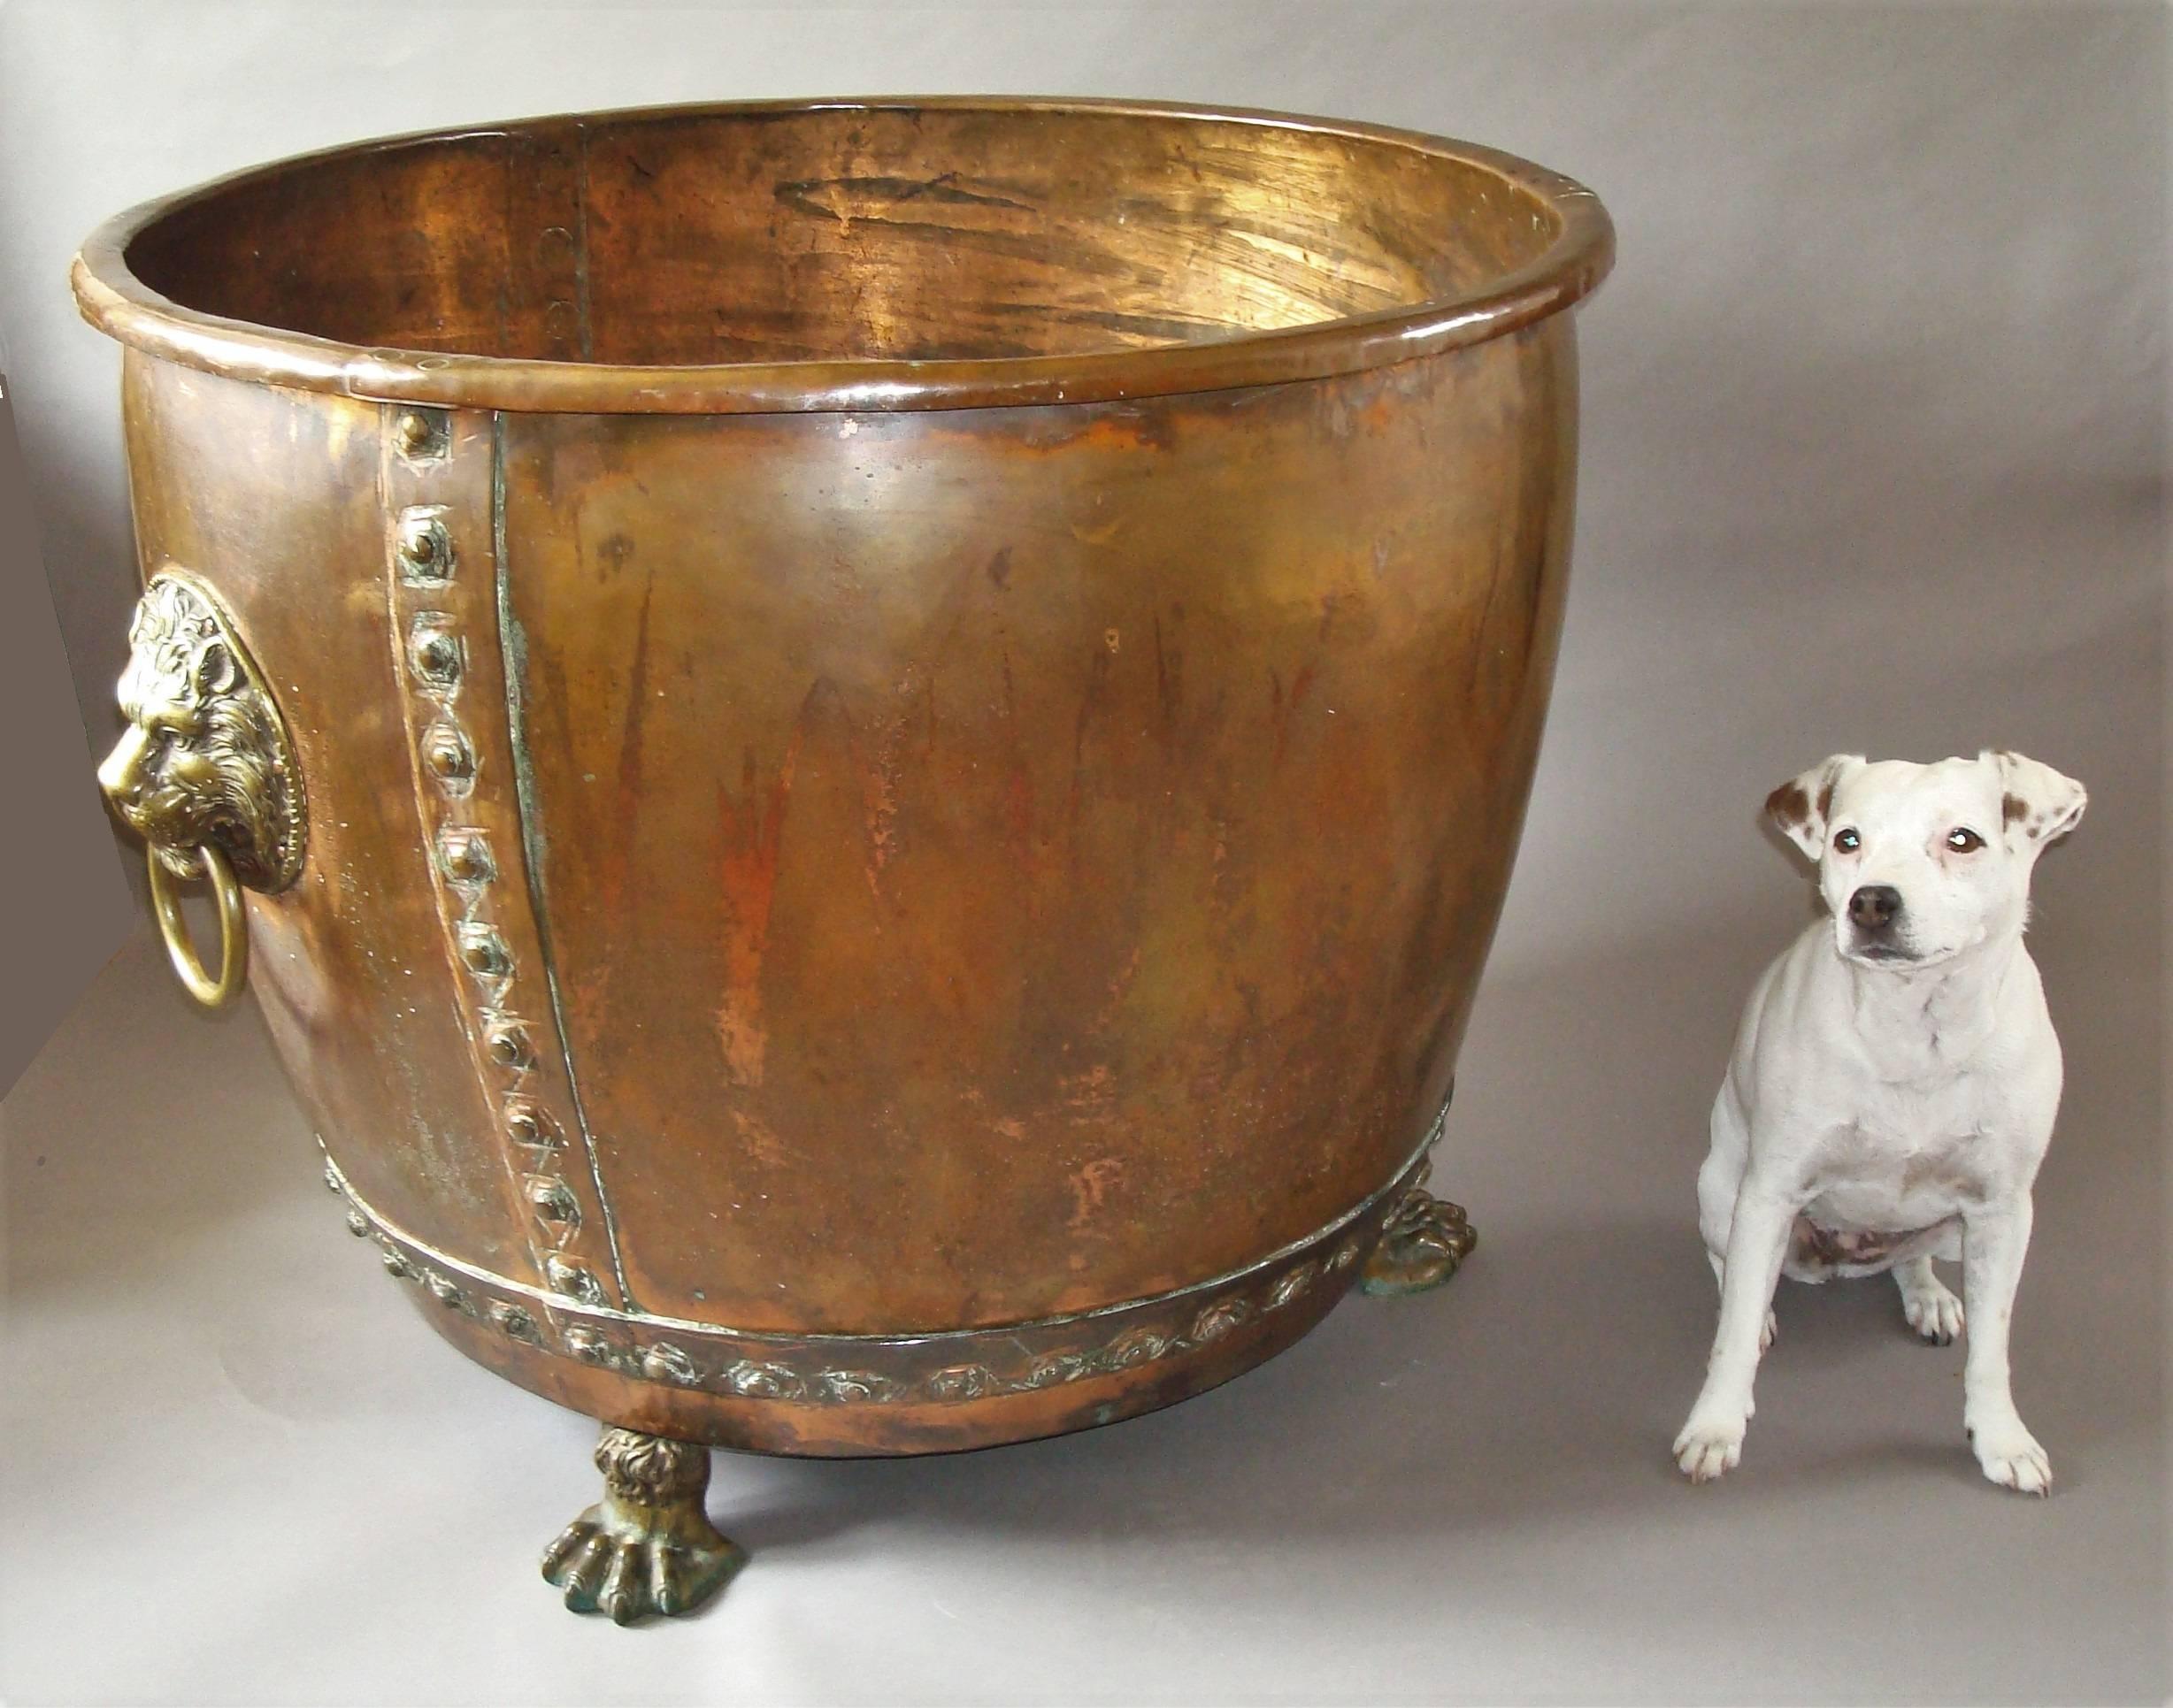 Massive 19th century English copper log basket / jardiniere of monumental proportions; the circular top with a rolled over edge, over the flared shaped body with bold riveted bands. The large brass lion mask handles with Fine detailing. Raised on